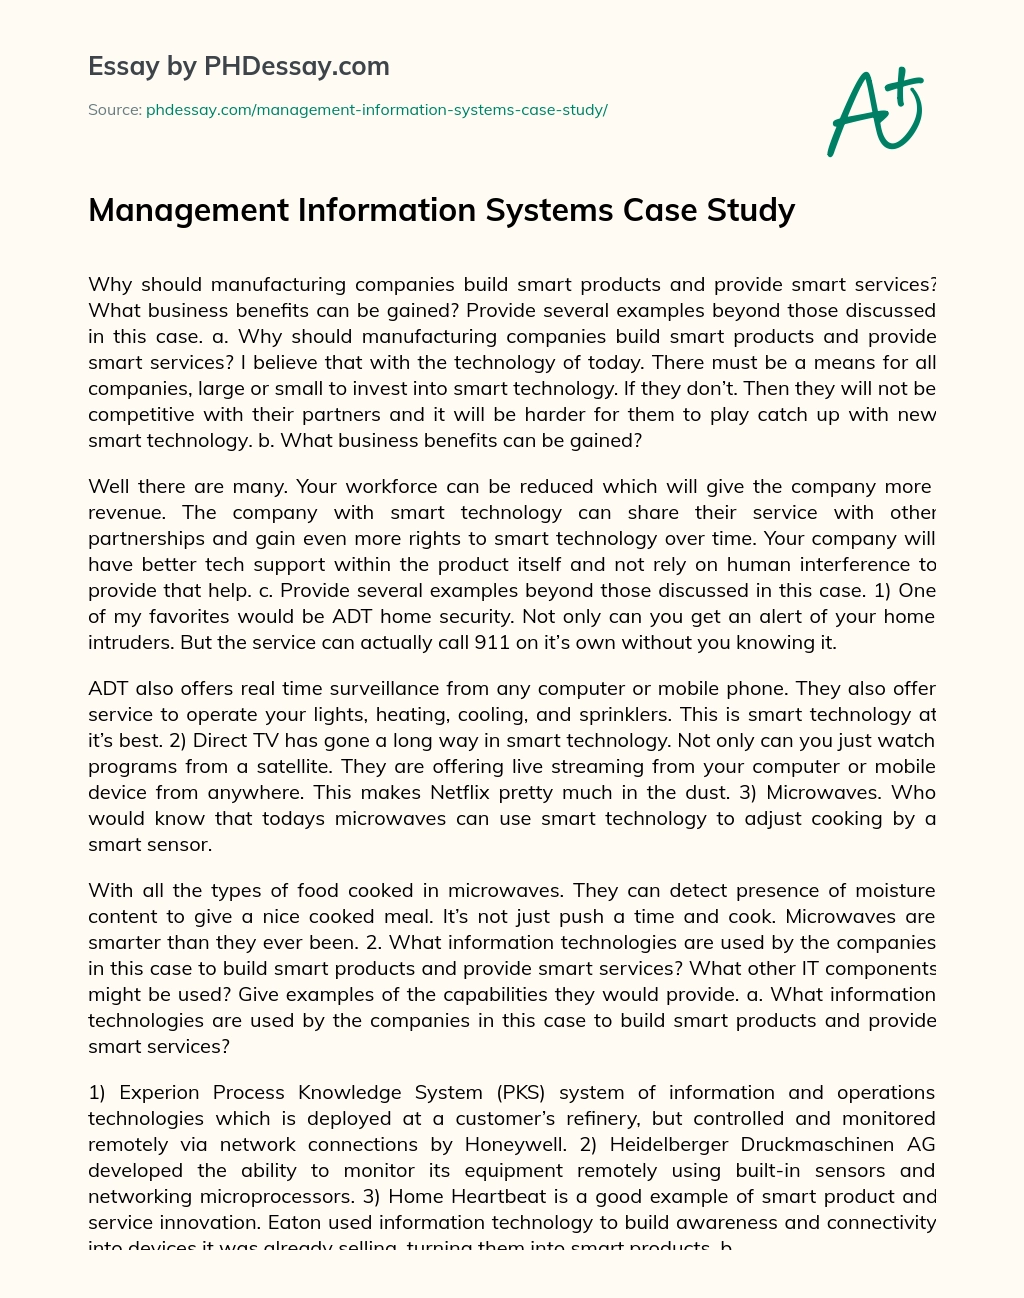 Management Information Systems Case Study essay